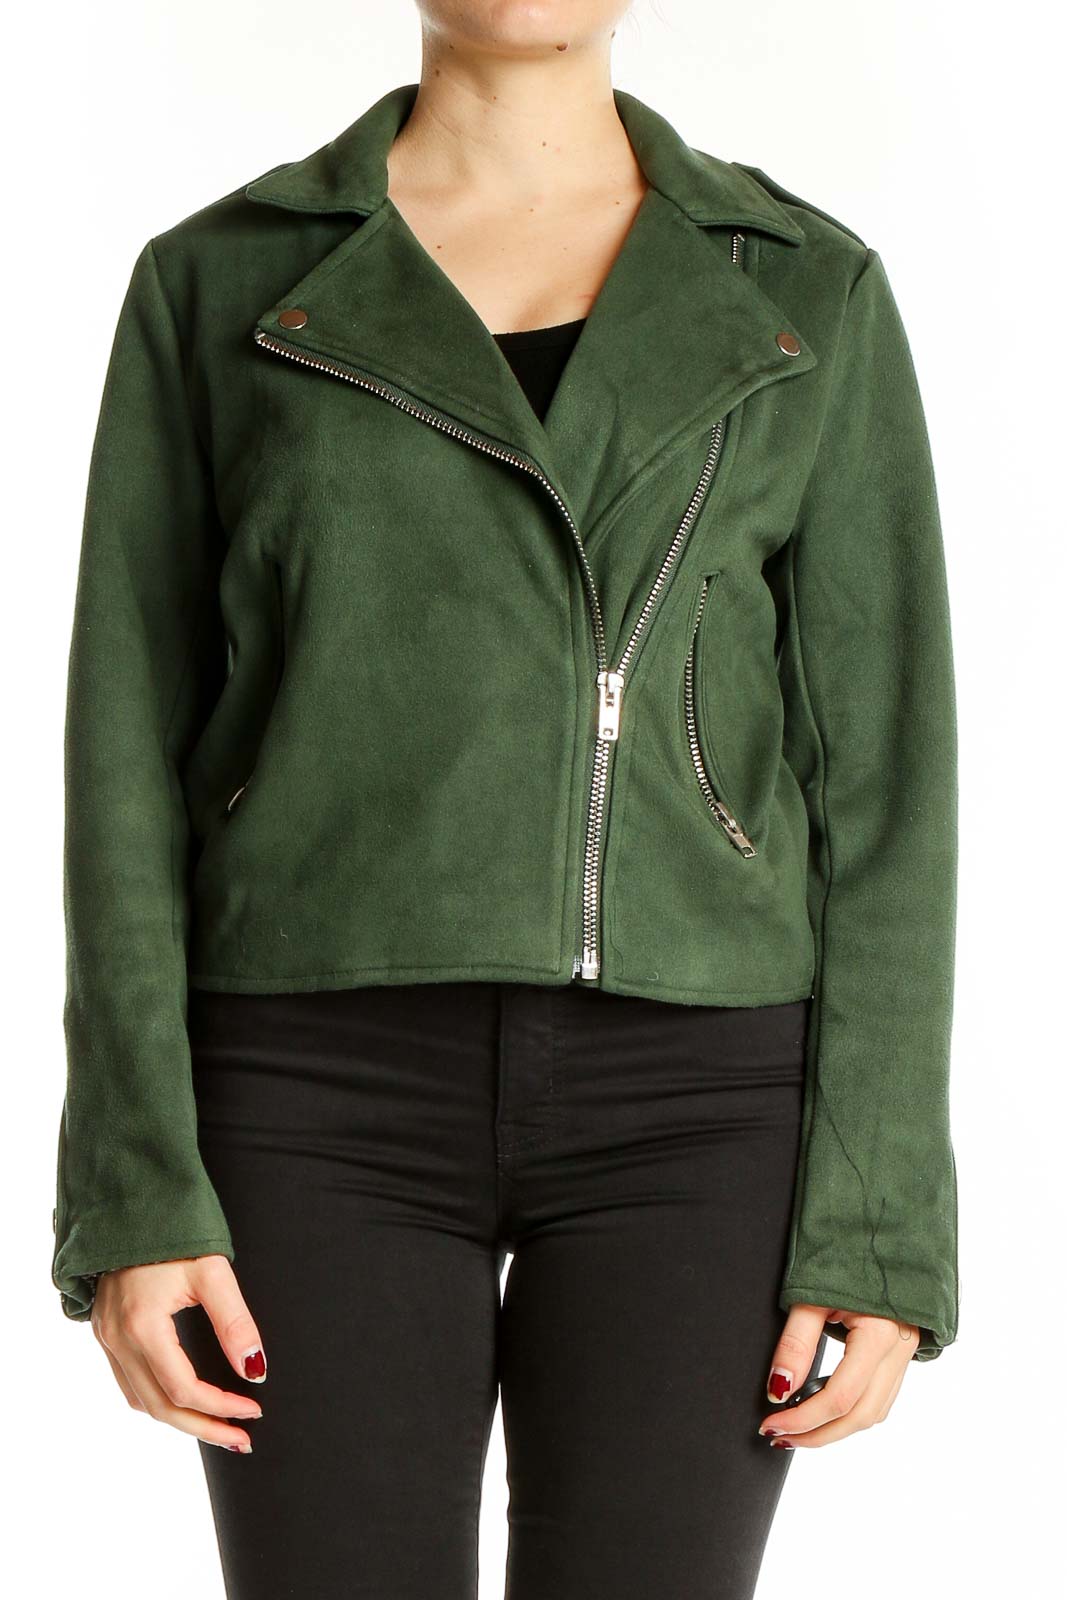 Green Motorcycle Jacket Front